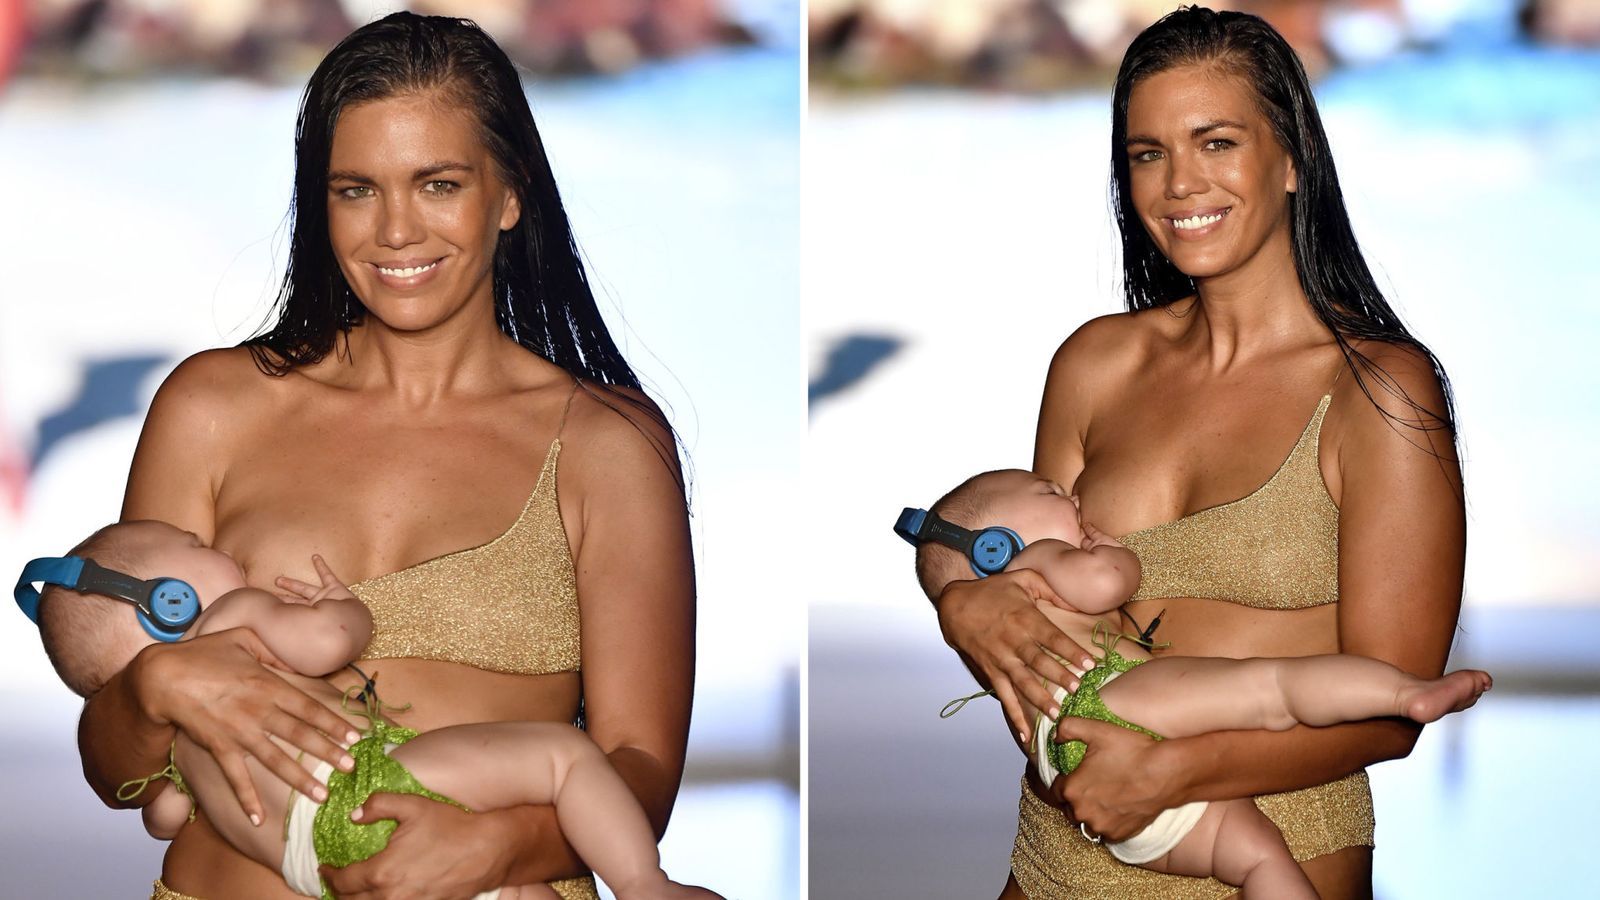 Bikini model Mara Martin breastfeeds a baby on runway at Sports Illustrated's swimsuit show in Miami. The stunner was seen nursing the newborn during the show at PARAISO during Miami Swim Week at The W Hotel South Beach